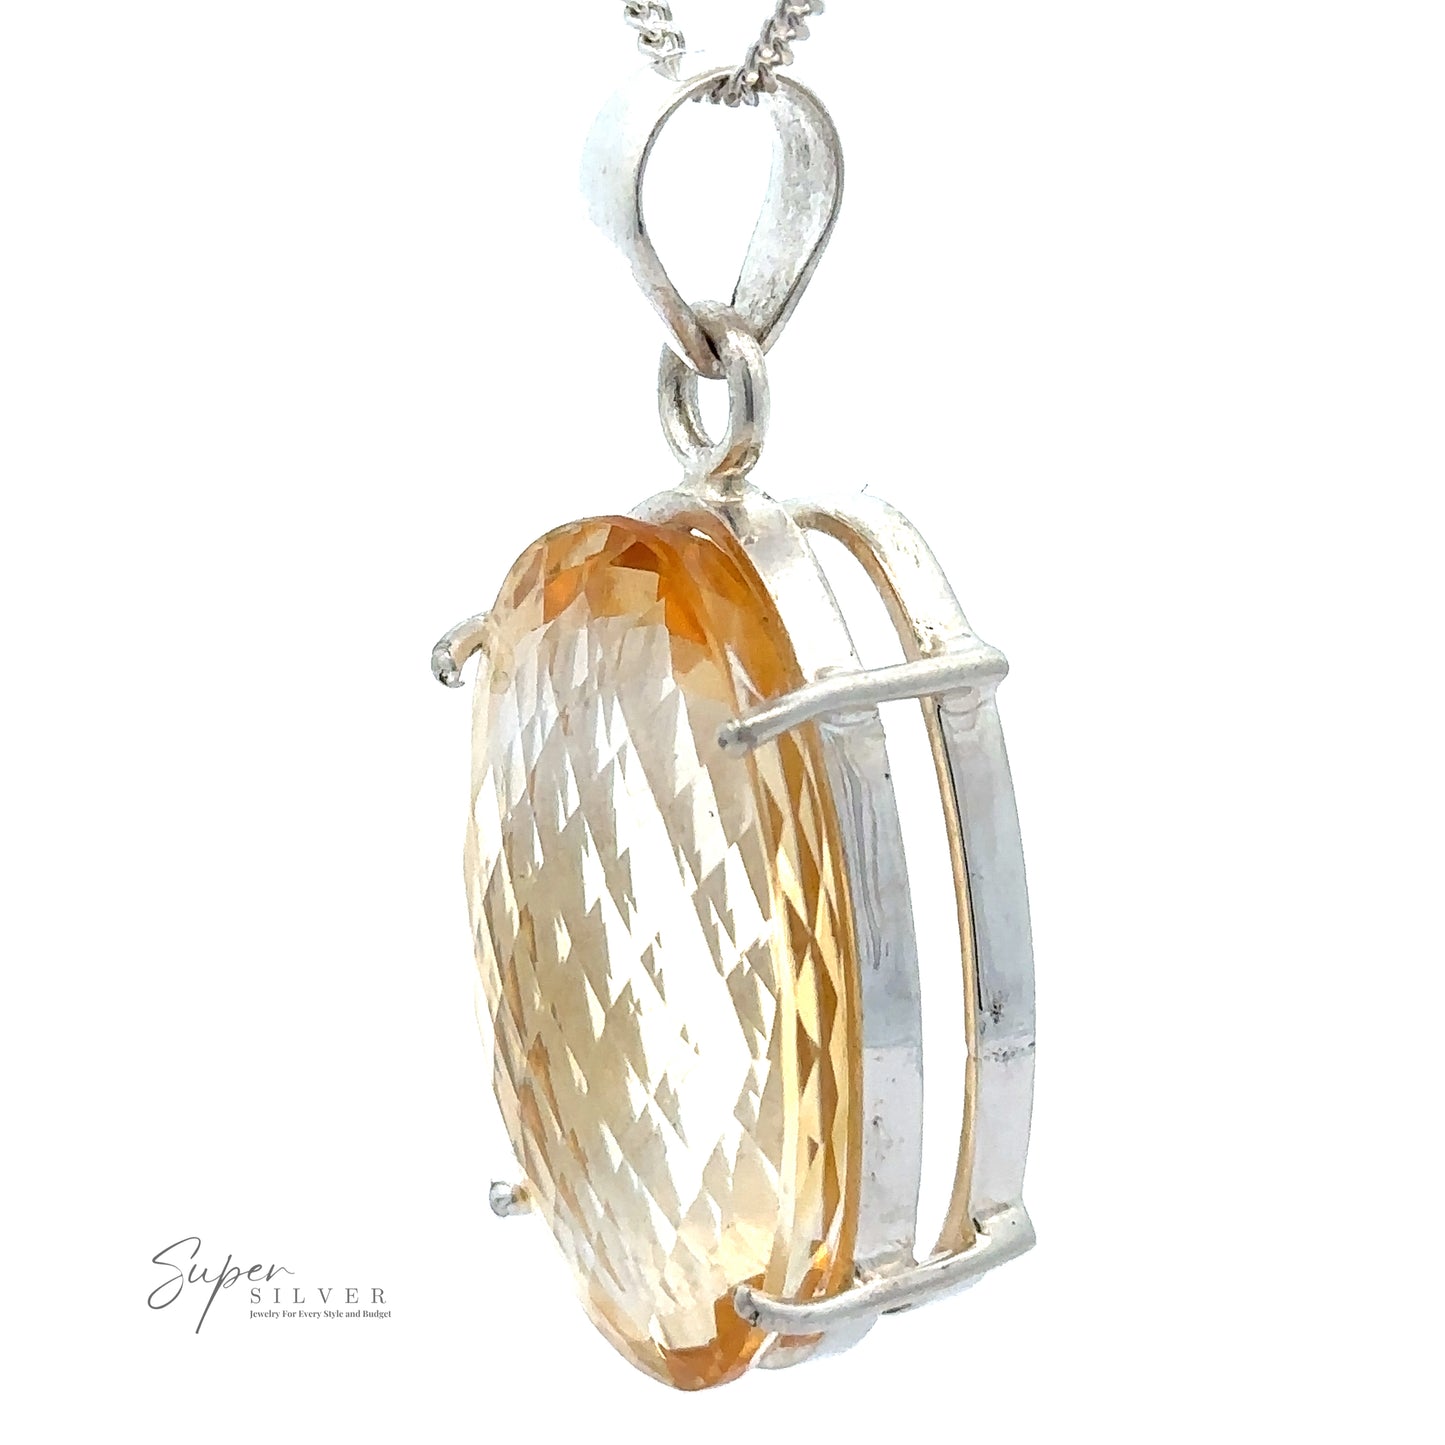 
                  
                    Brilliant Pronged Citrine Pendant with a large, oval, faceted citrine gemstone in a prong setting. The pendant, crafted in sterling silver, is attached to a silver chain. "Super Silver" logo is visible in the corner.
                  
                